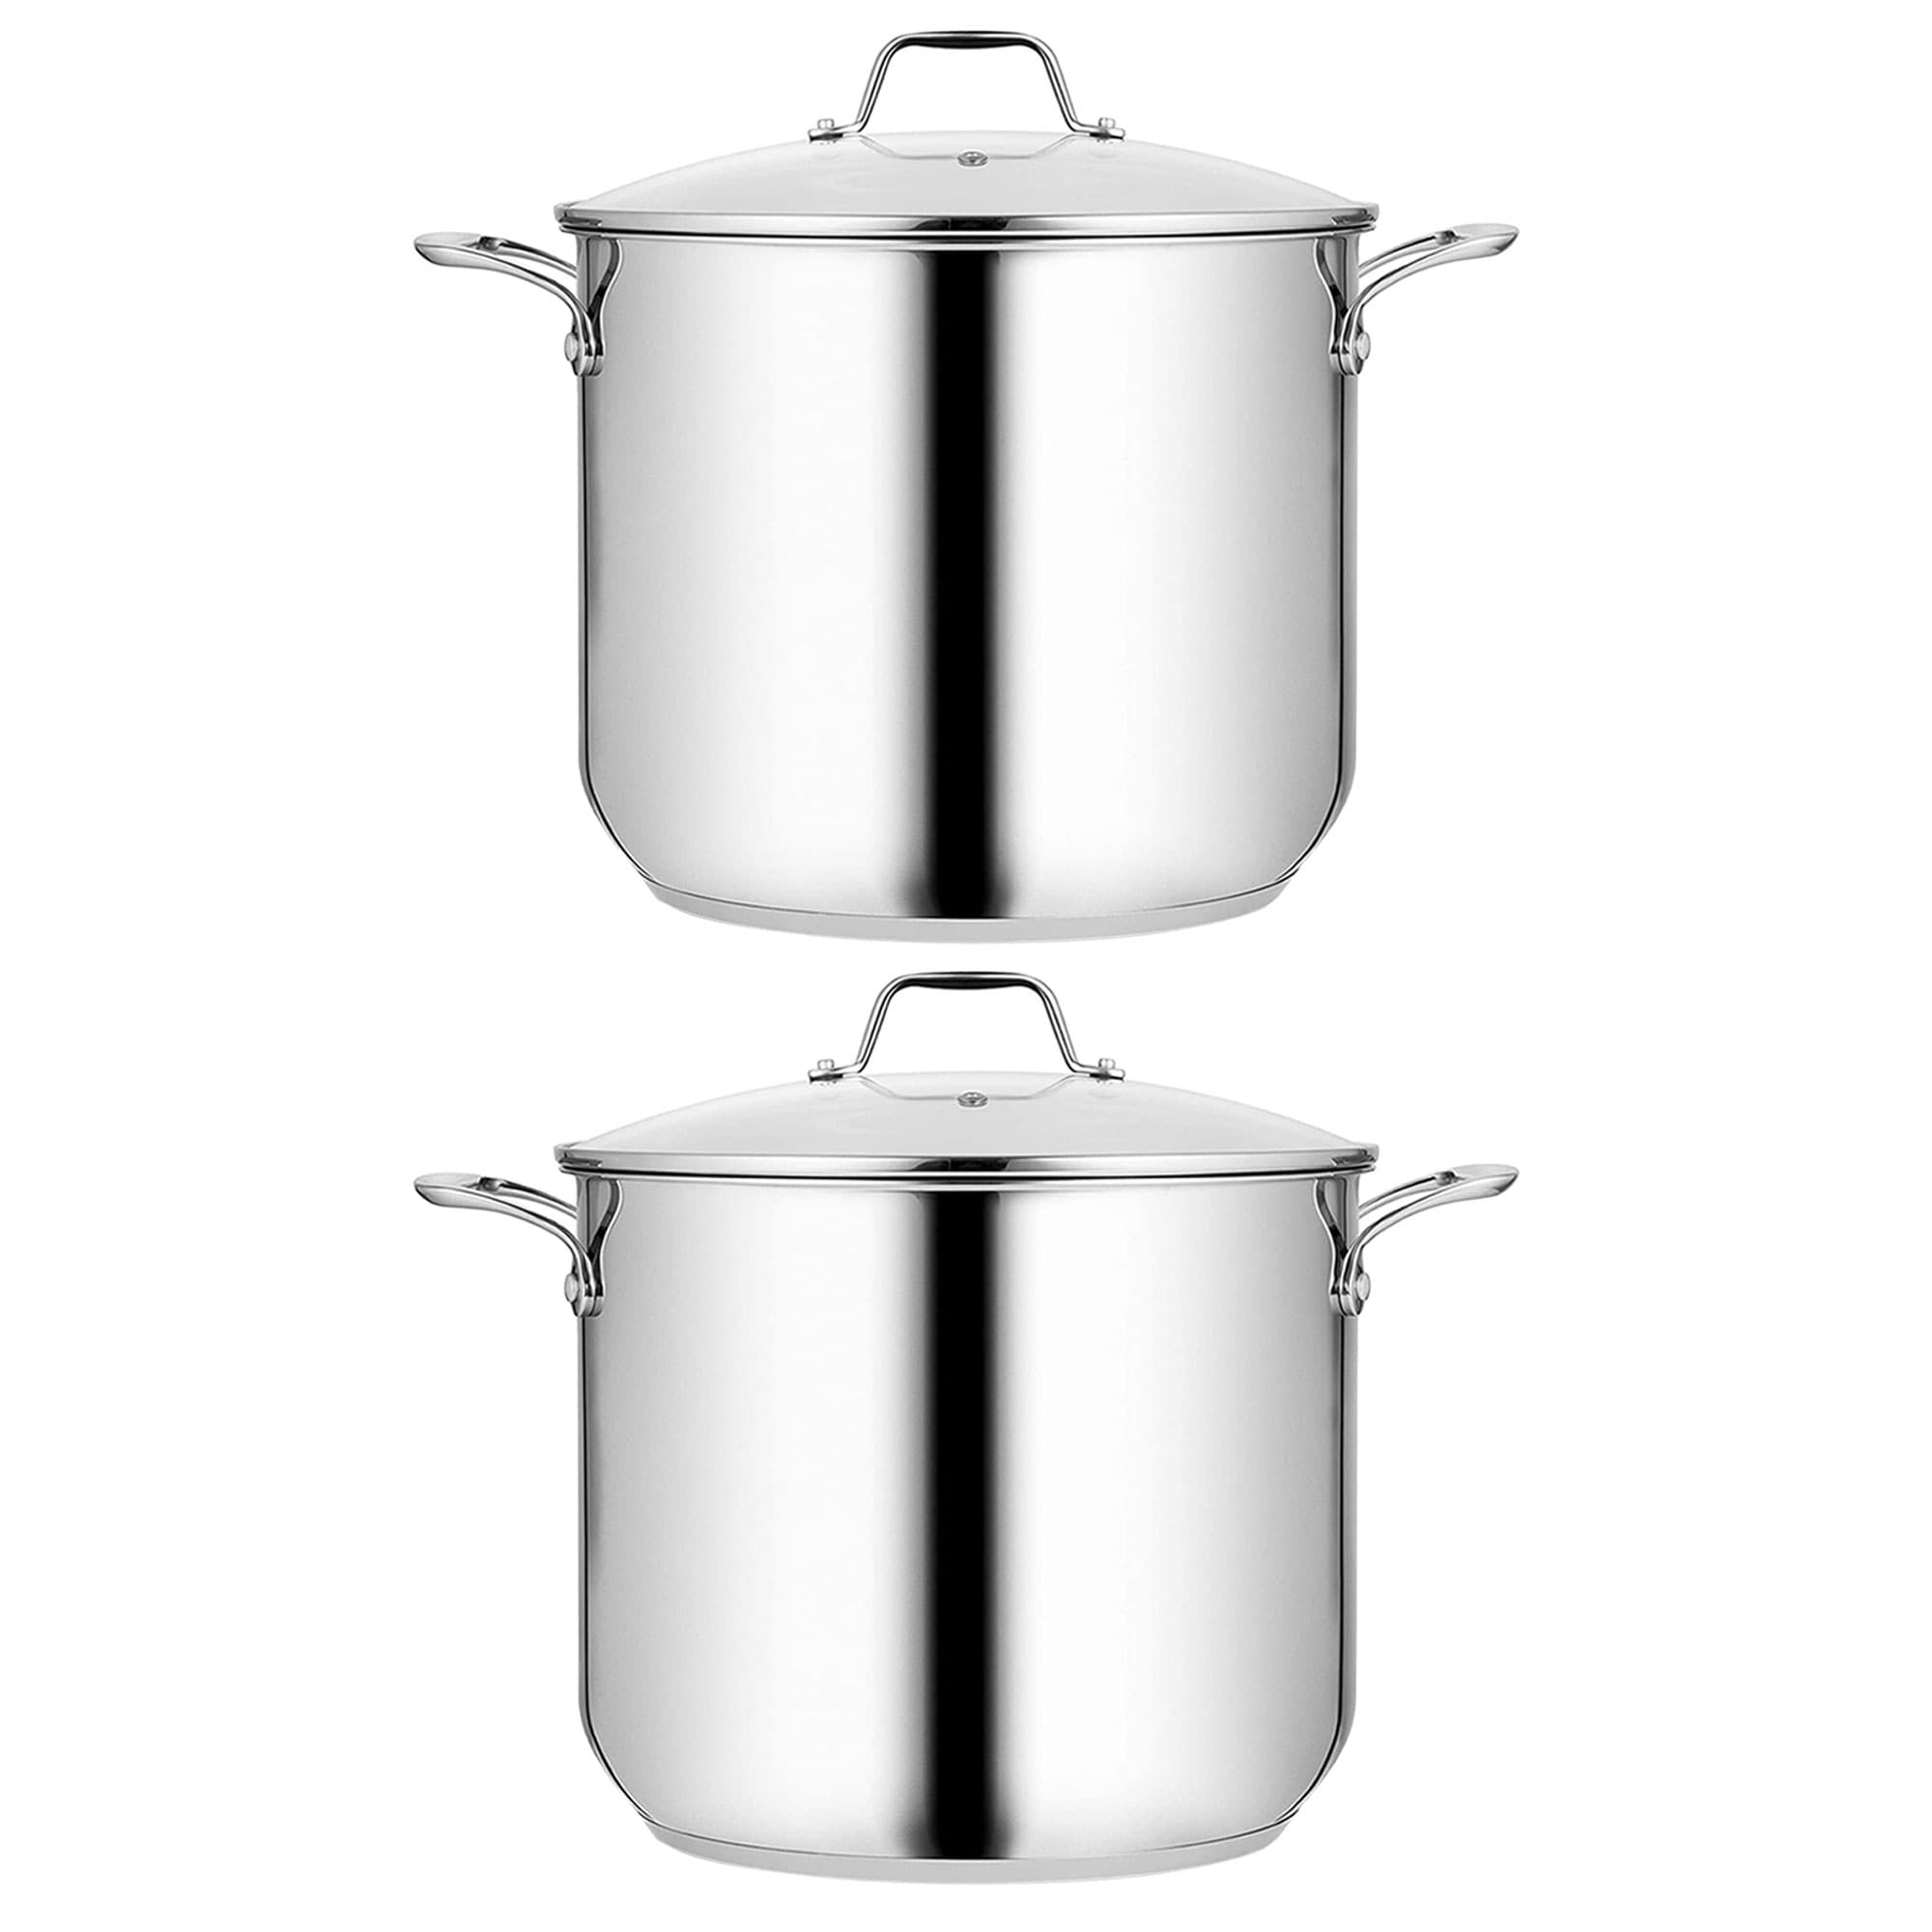  NutriChef 5-Quart Stainless Steel Stockpot - 18/8 Food